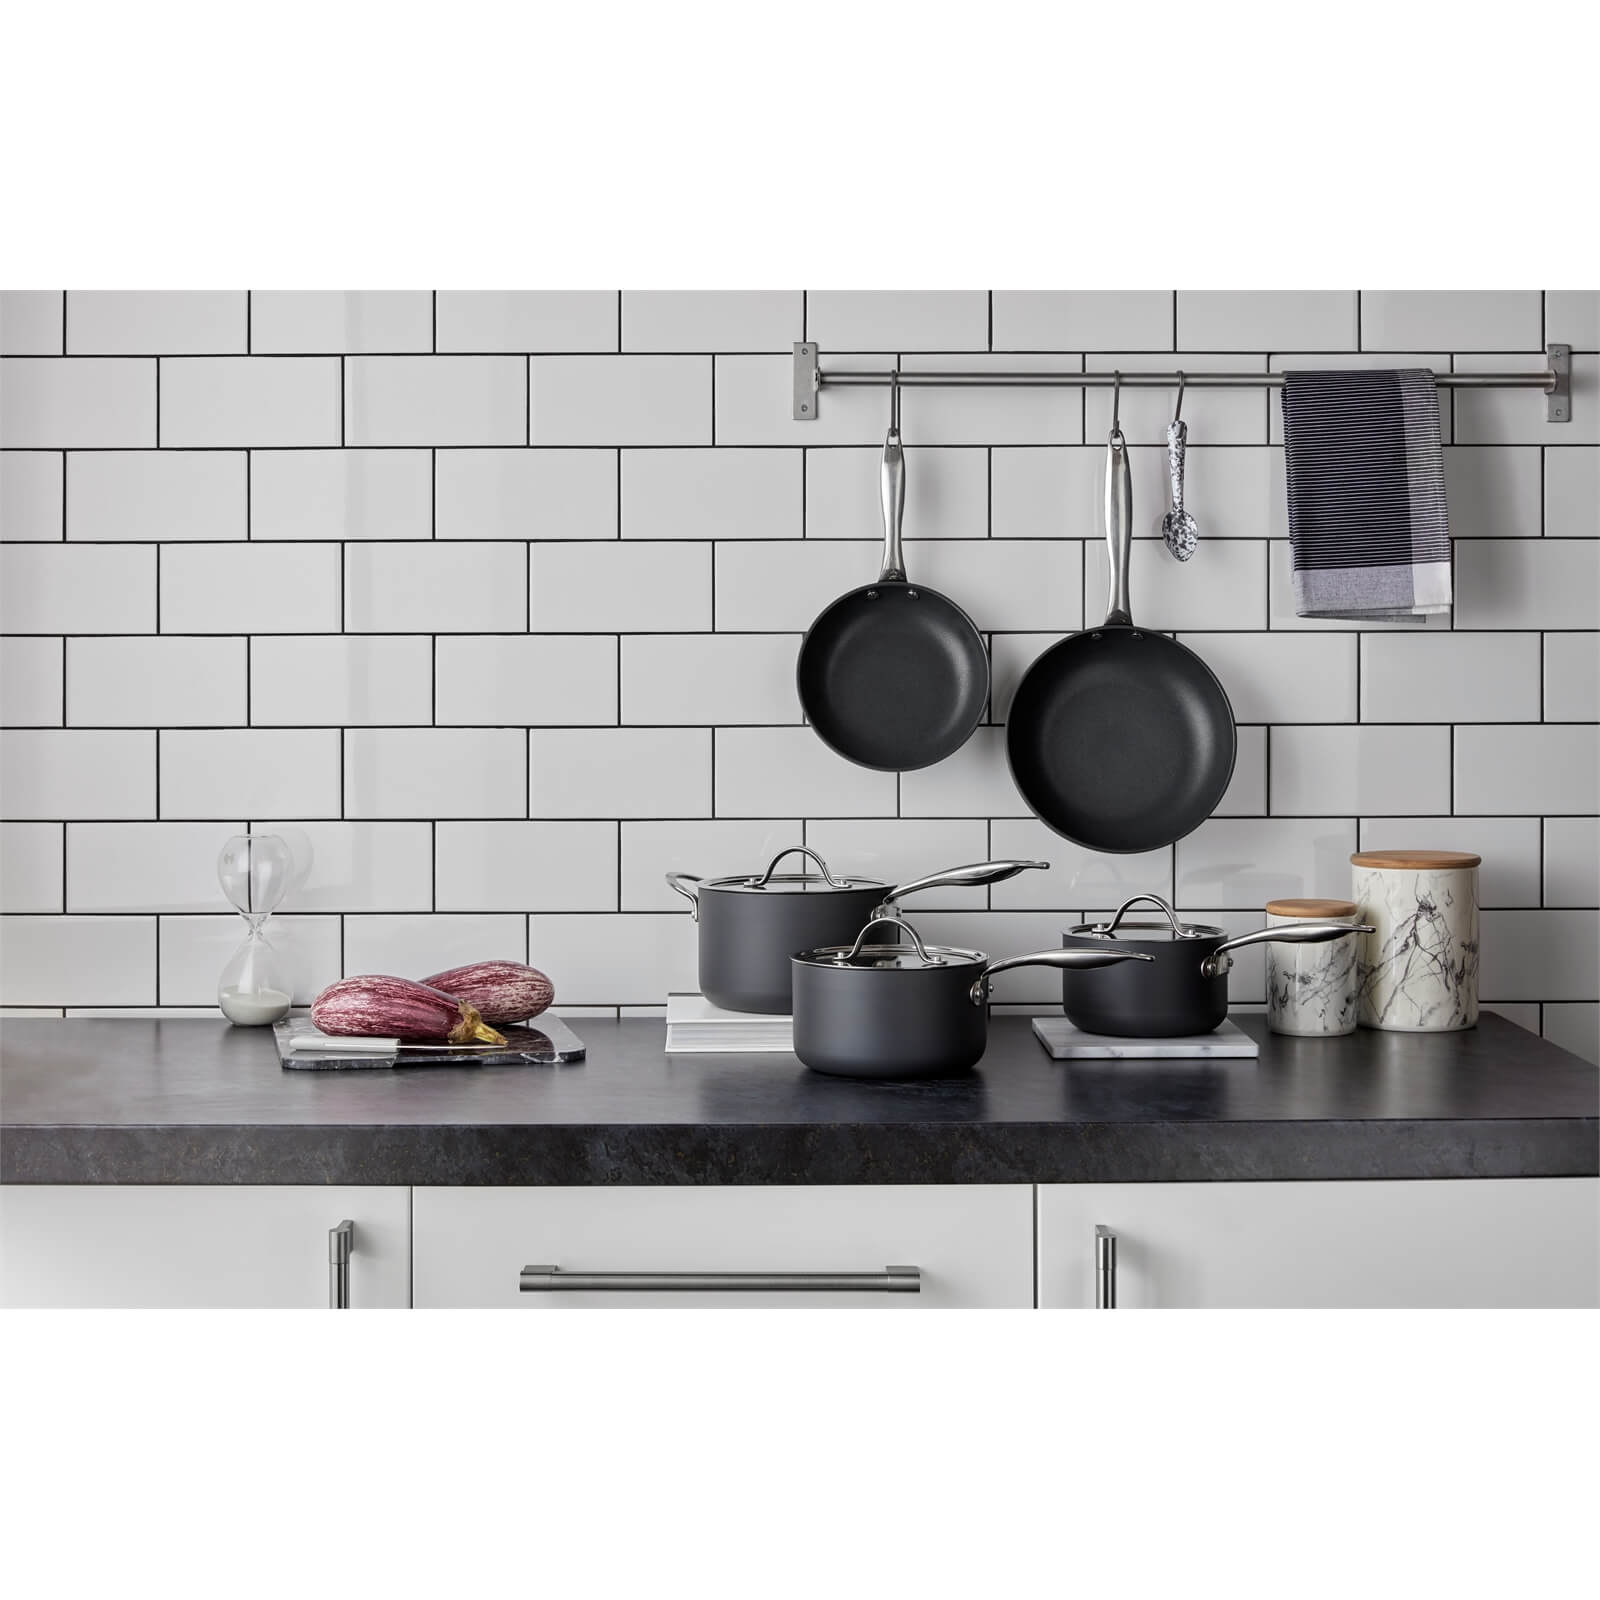 Denby Anodised 3 Piece Frying Pan Set